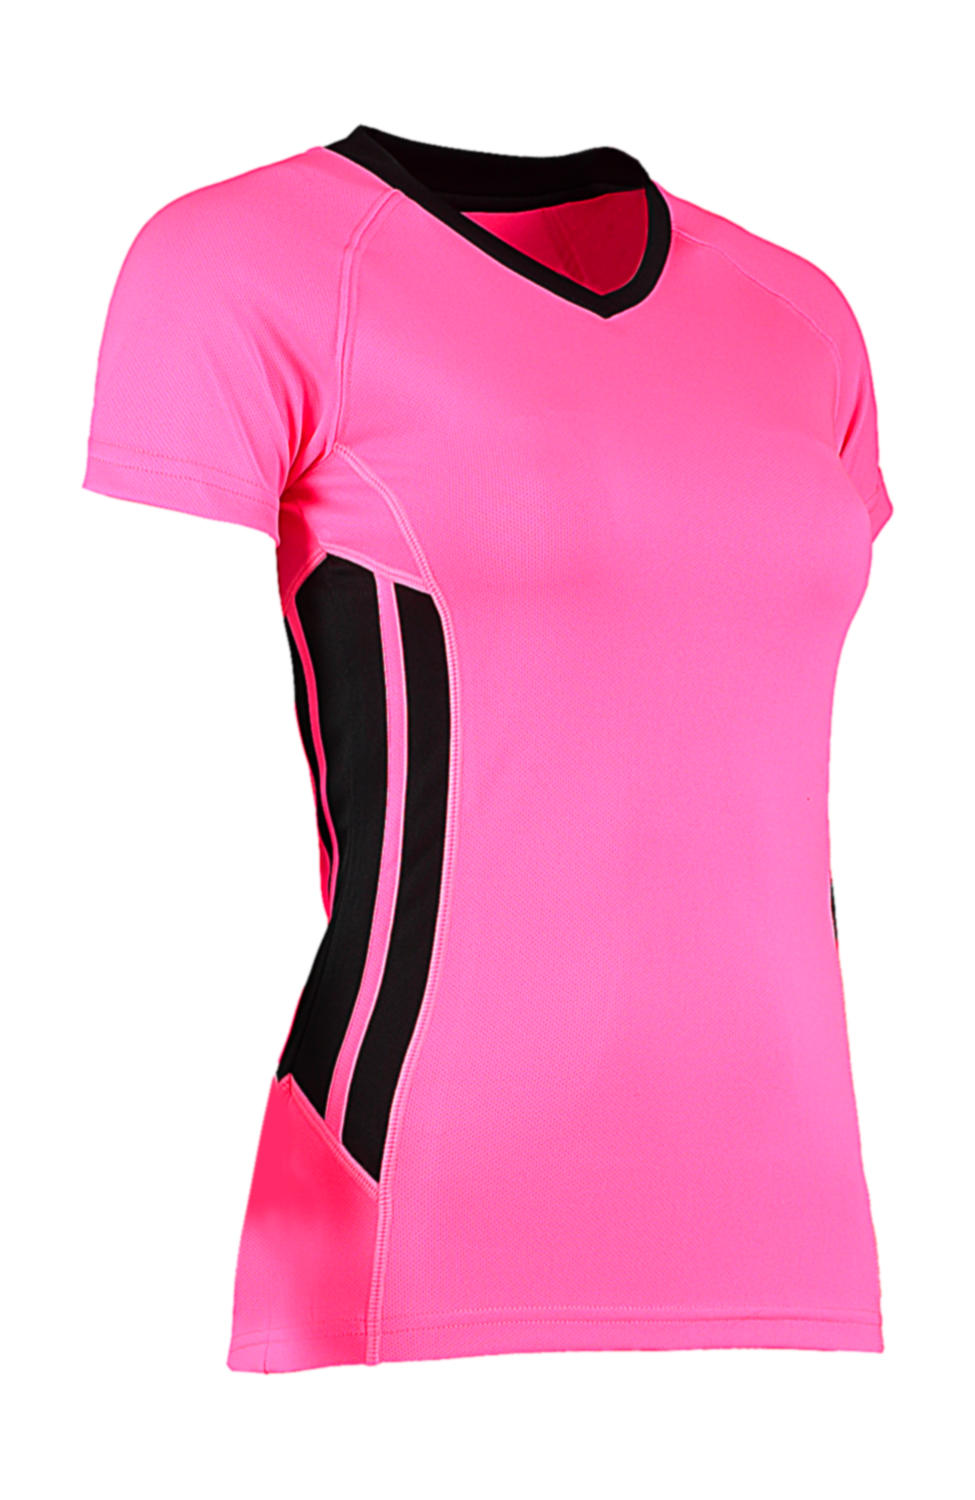  Womens Regular Fit Cooltex? Training Tee in Farbe Fluorescent Pink/Black